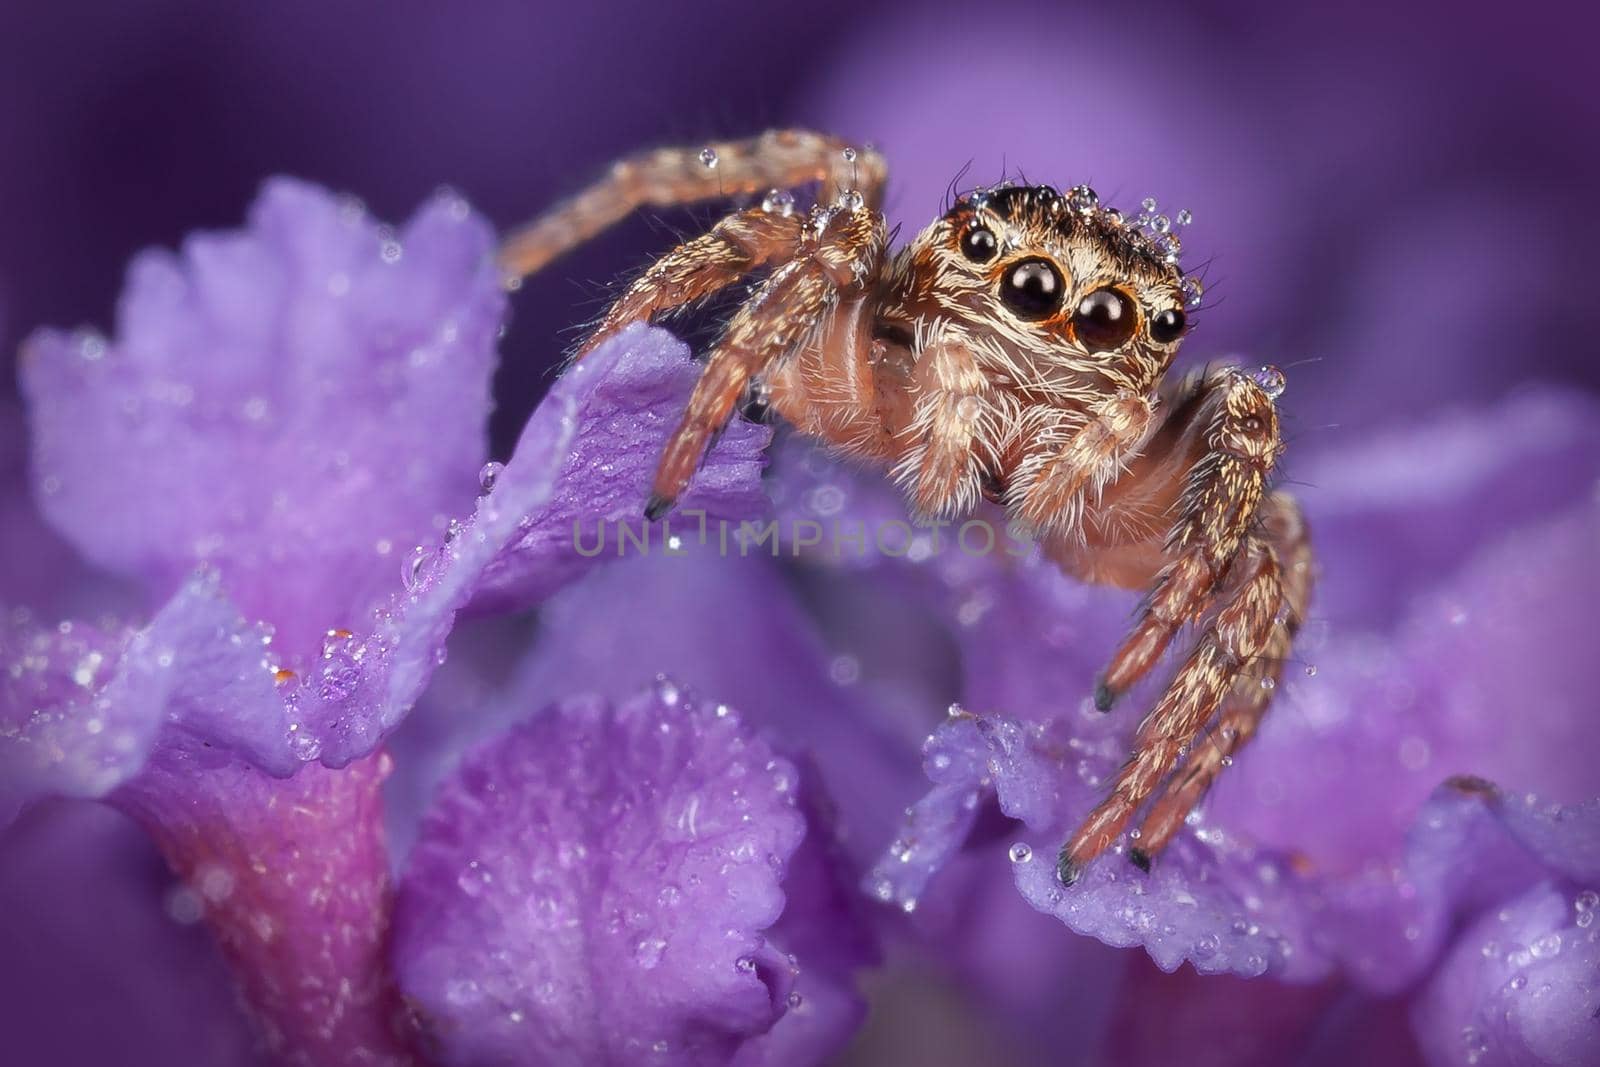 Rich Purple and shining water droplets by Lincikas